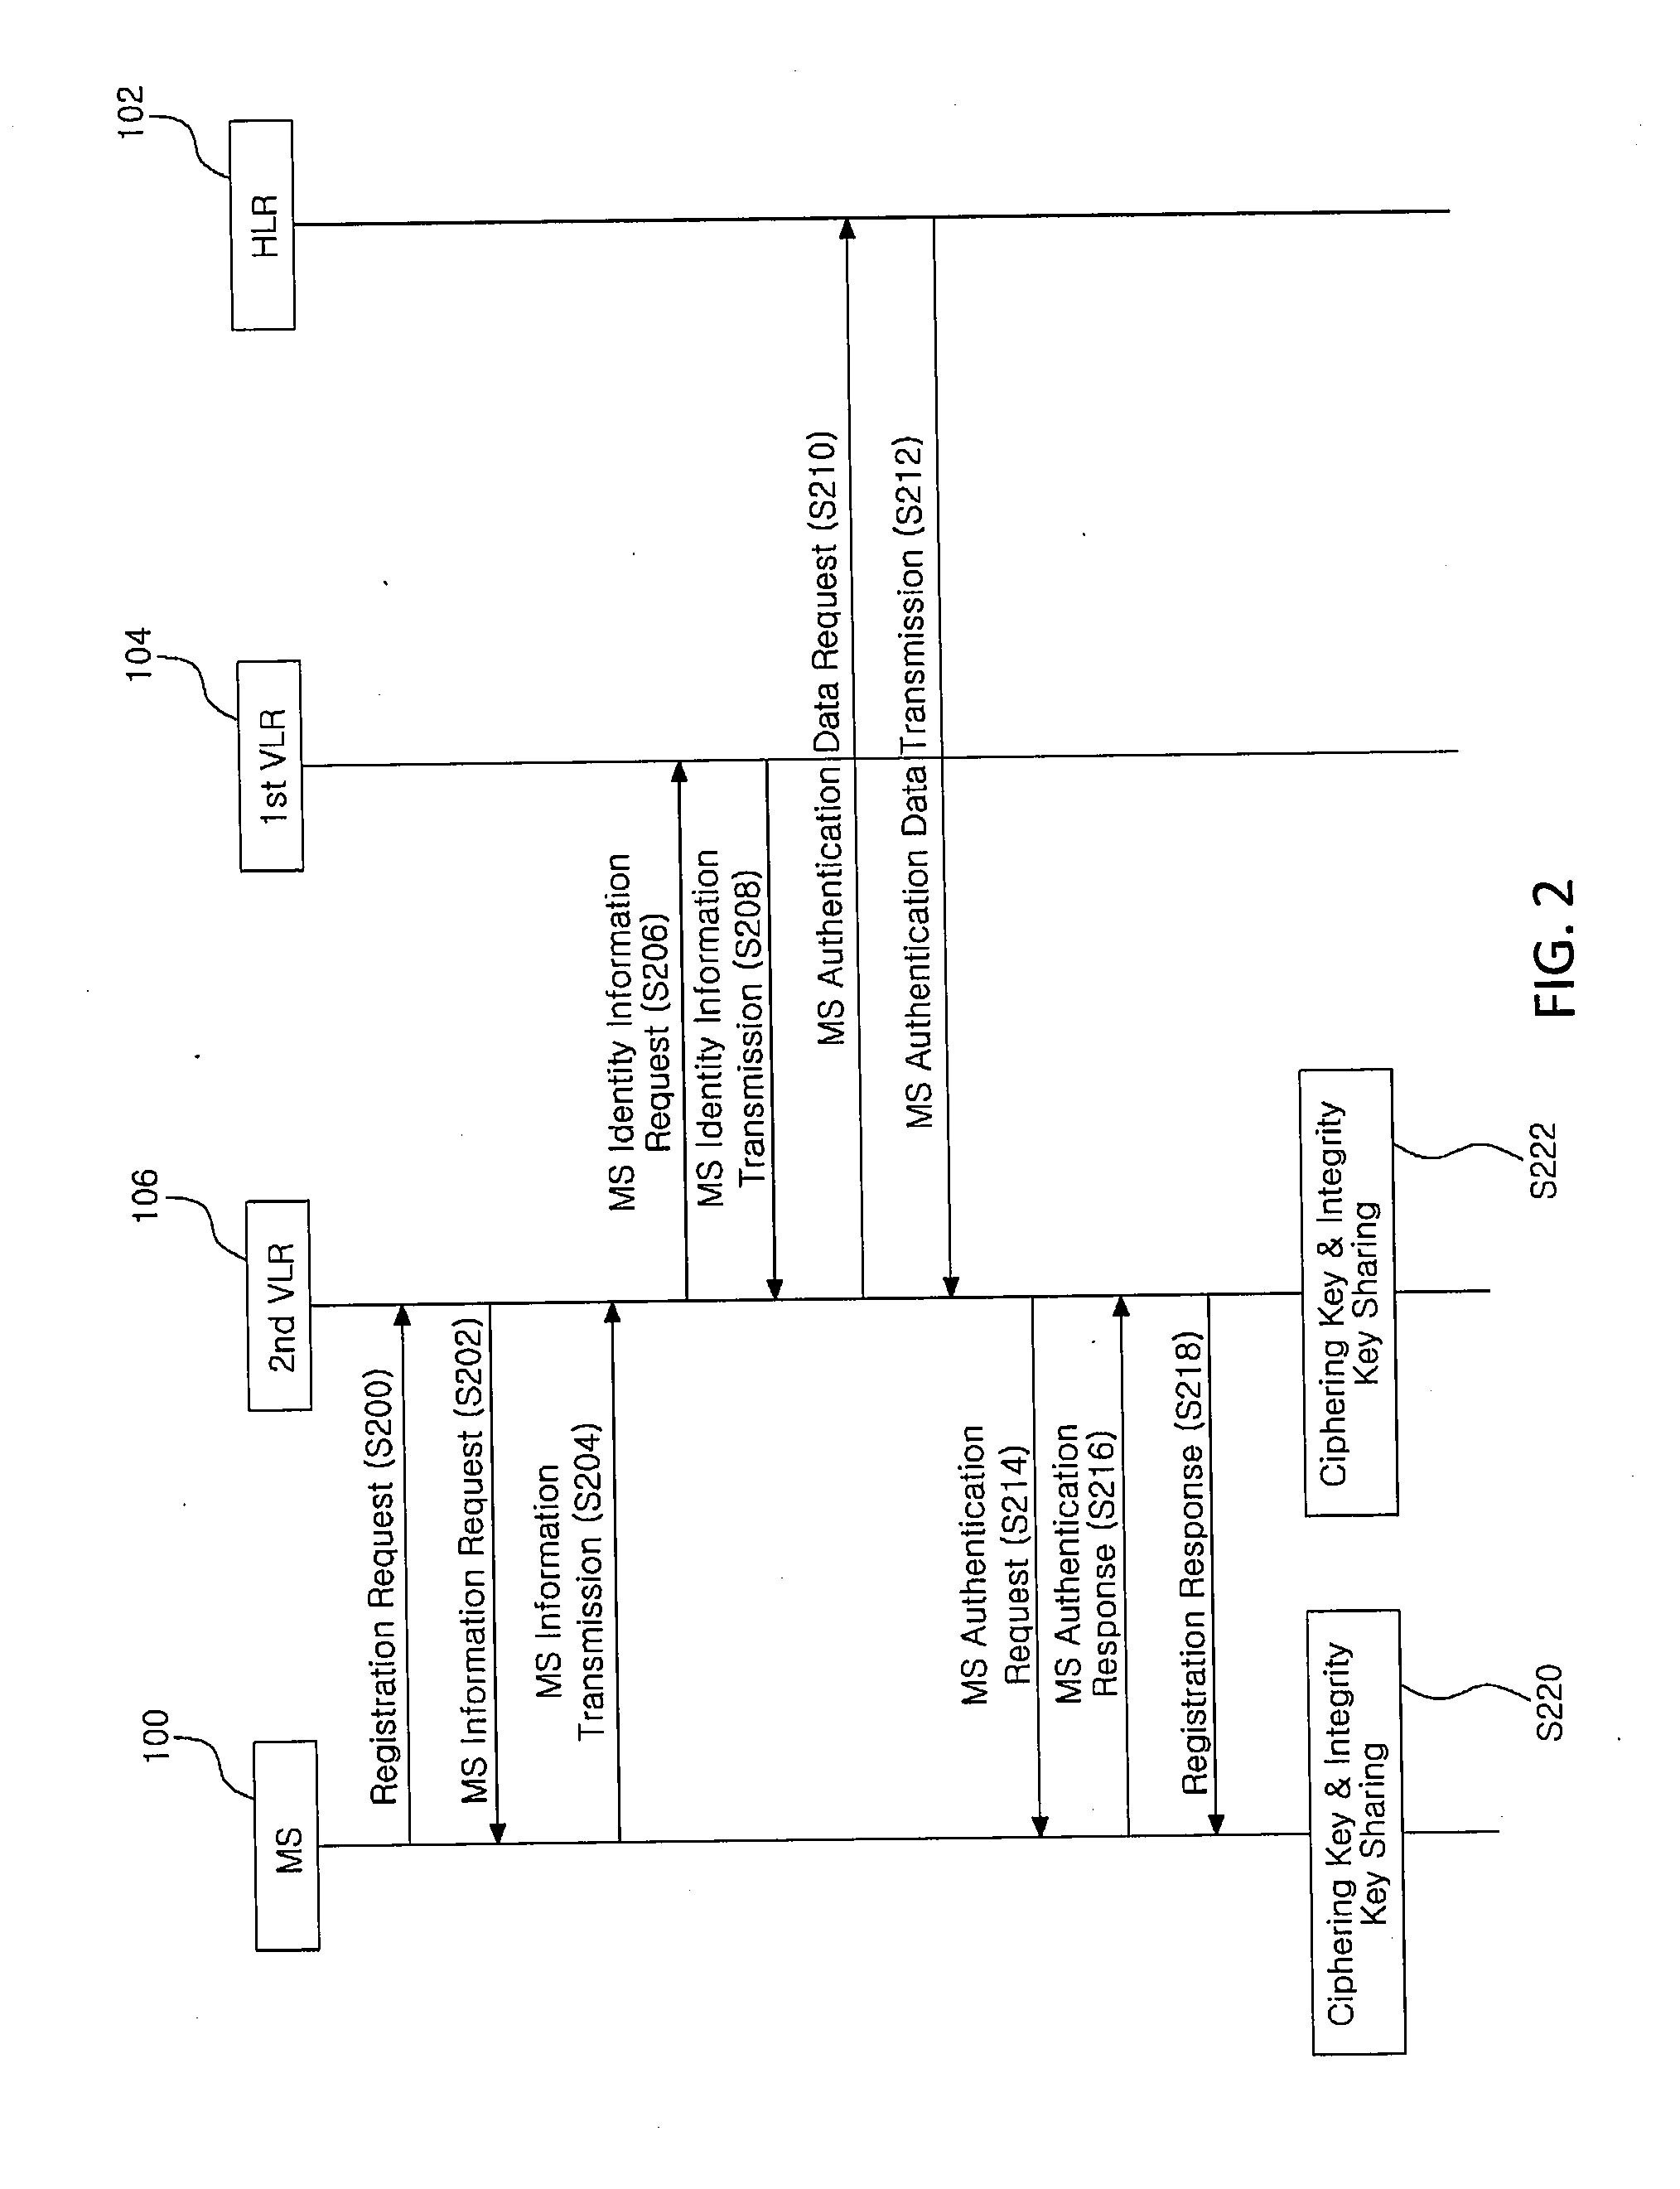 Method for authentication and key establishment in a mobile communication system and method of operating a mobile station and a visitor location register